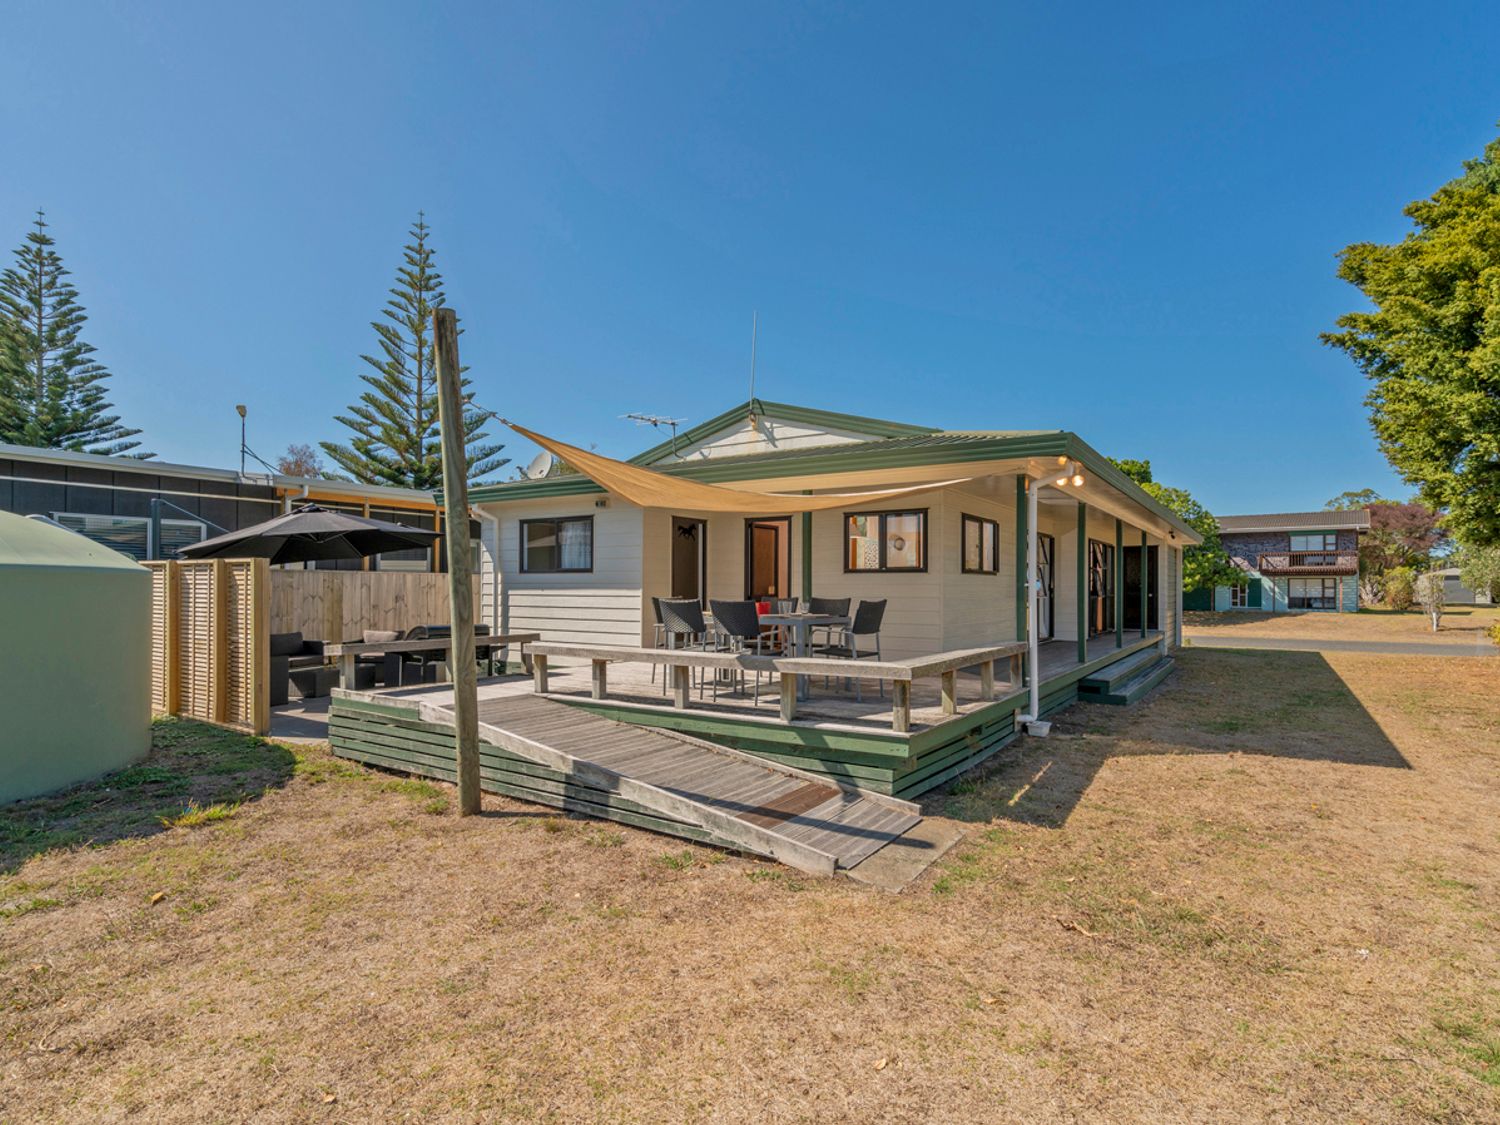 Oyster Bliss - Cooks Beach Holiday Home -  - 1028175 - photo 1